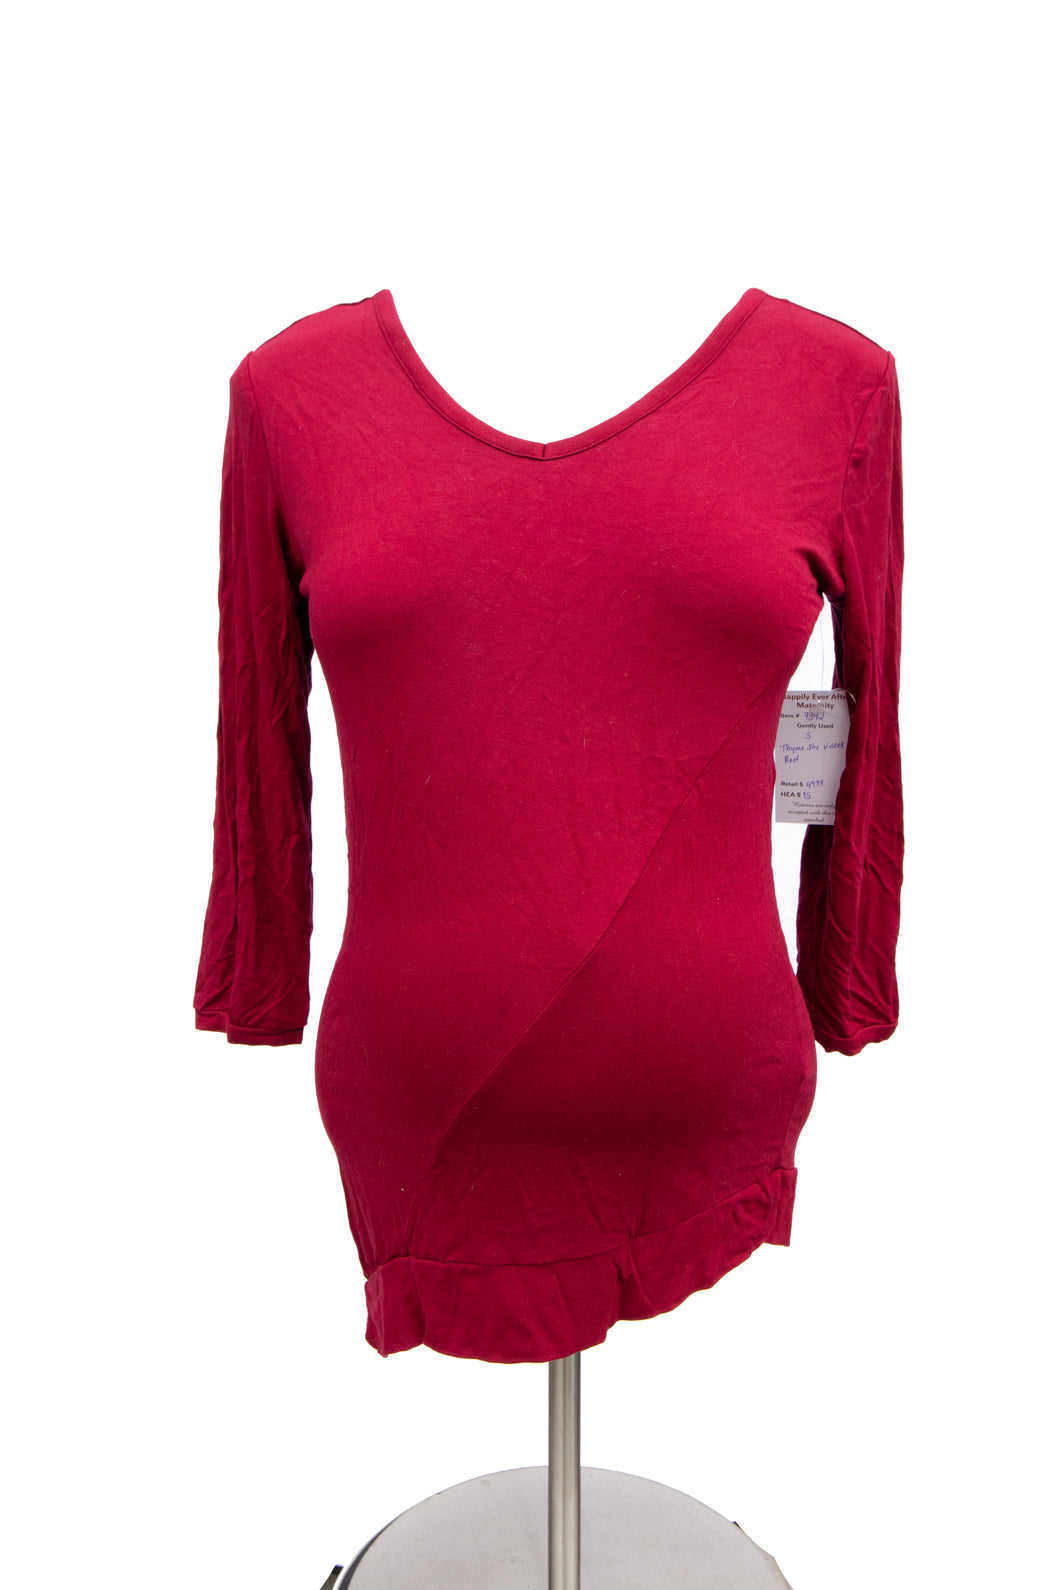 S Thyme maternity Long Sleeve top in a Rich red